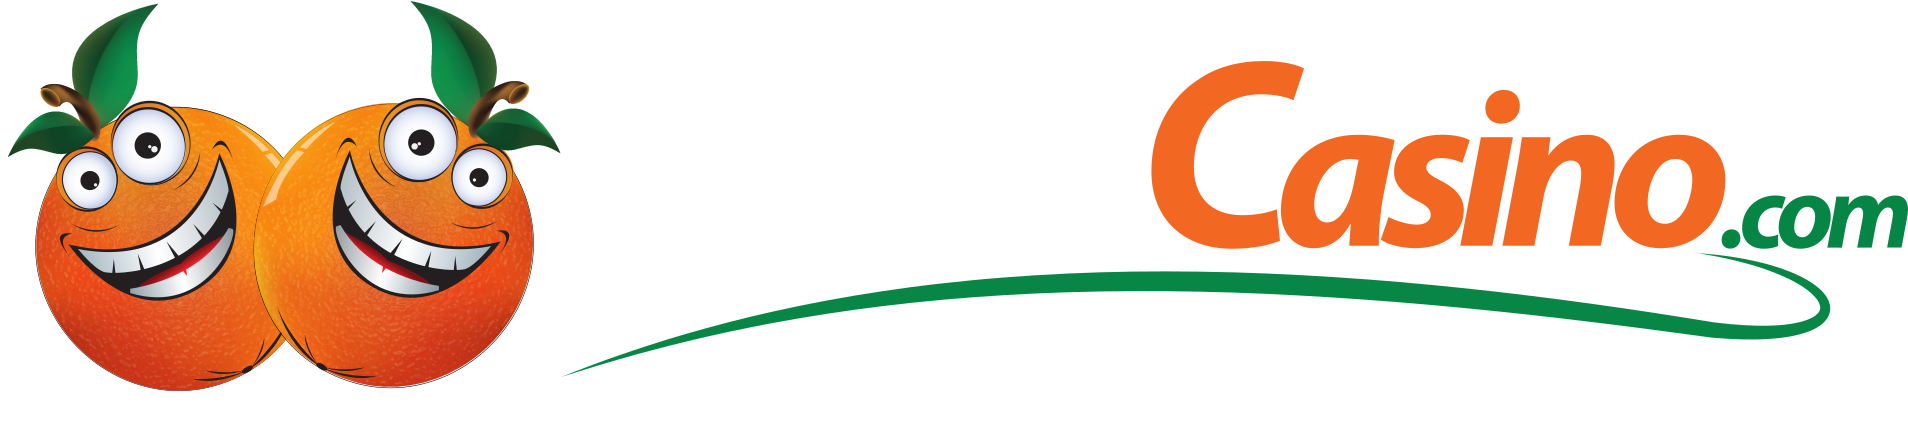 Casino as One of the Best Online Casino with Free Play Bonus